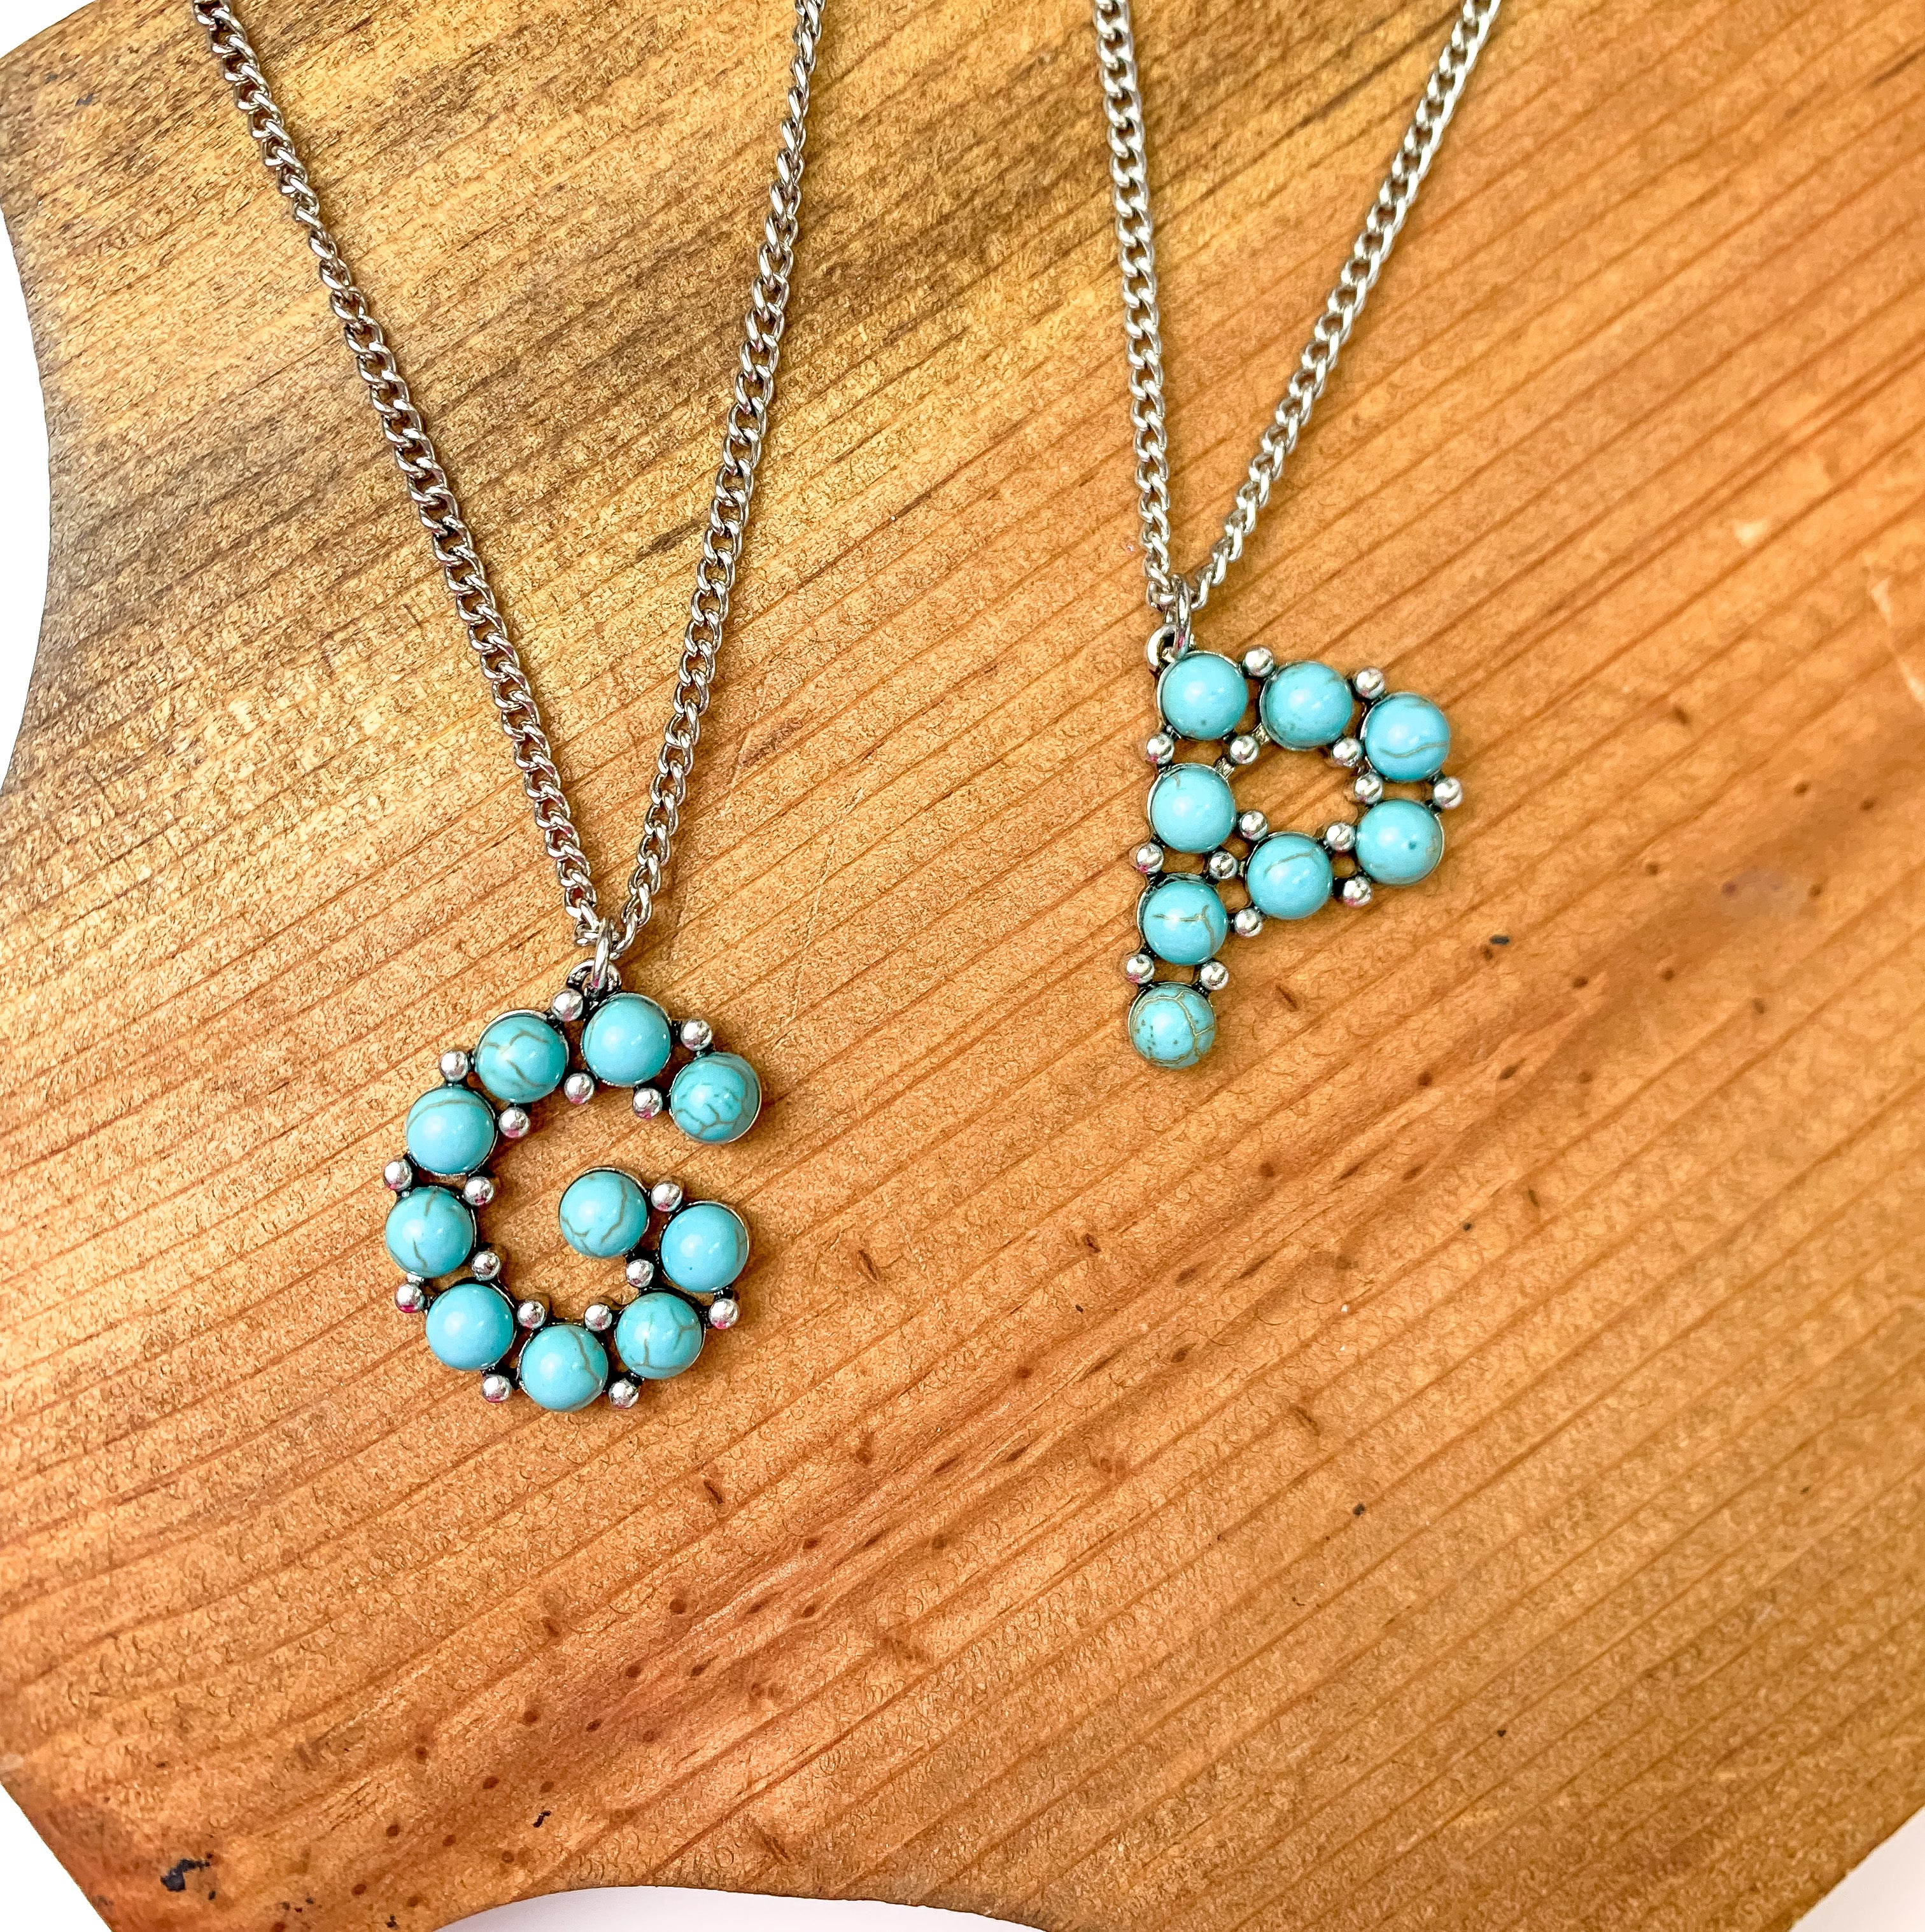 Say My Name Initial Necklaces in Turquoise - Giddy Up Glamour Boutique